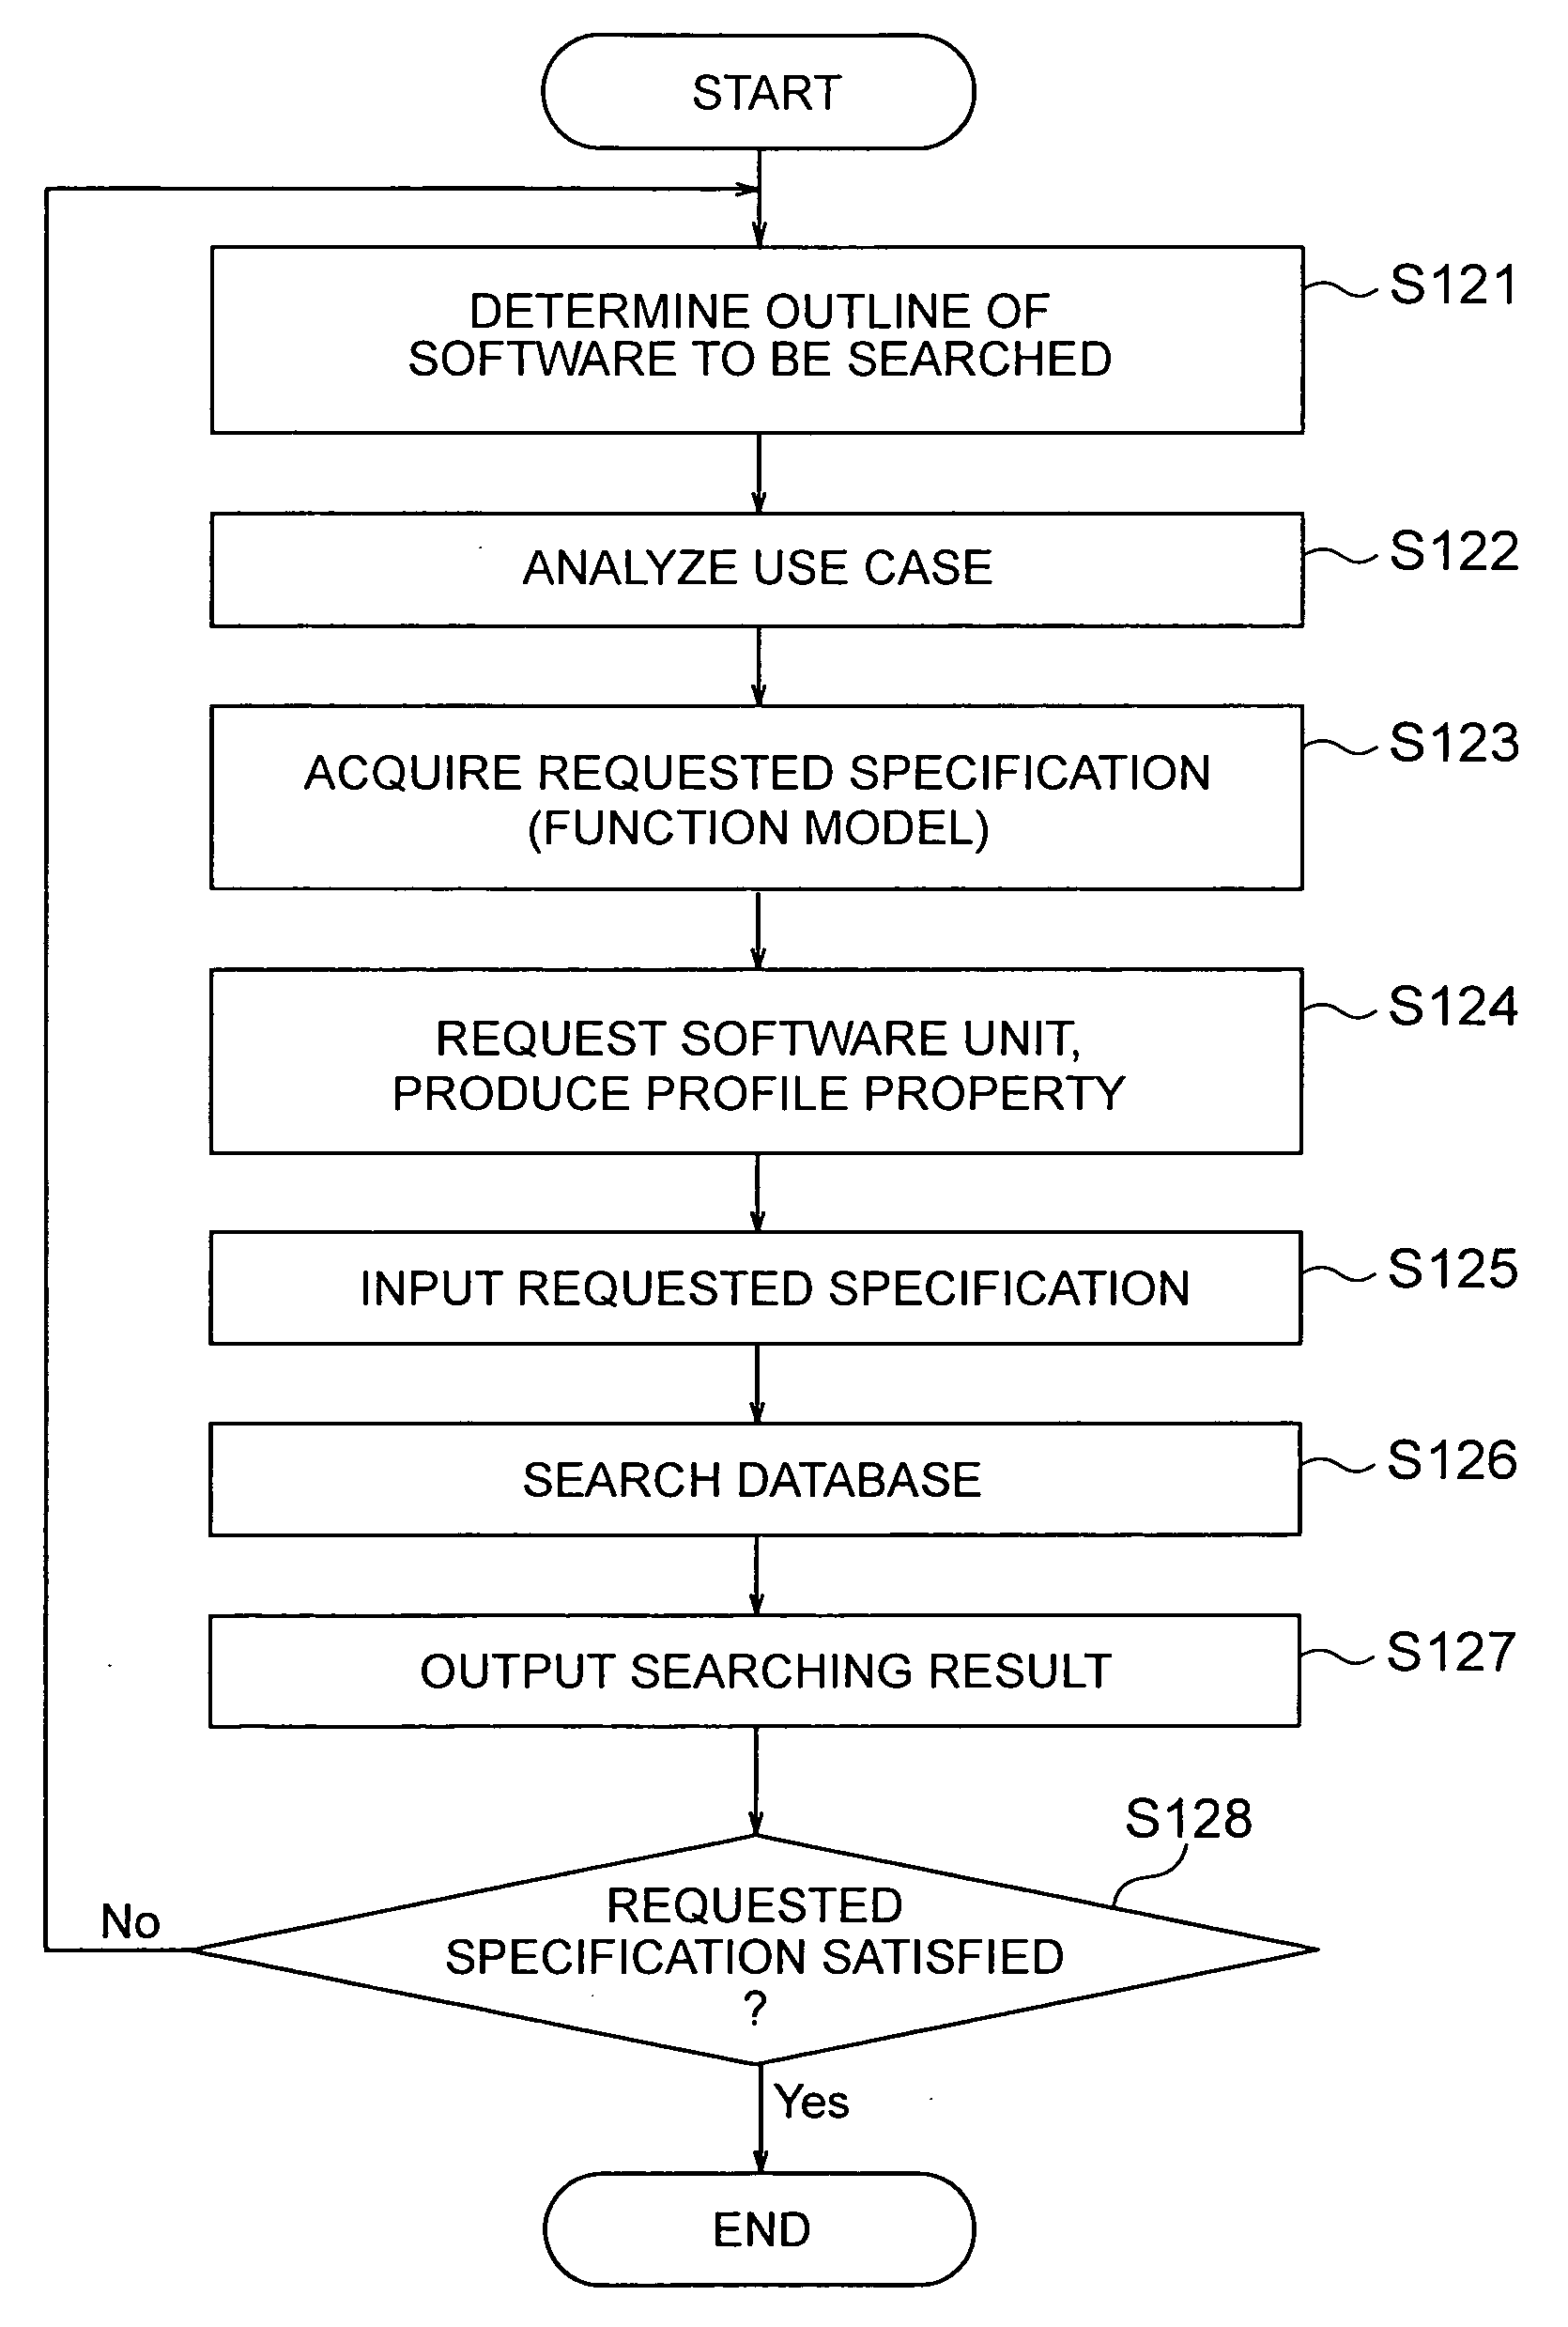 Apparatus and method for searching for software units for use in the manufacturing industry